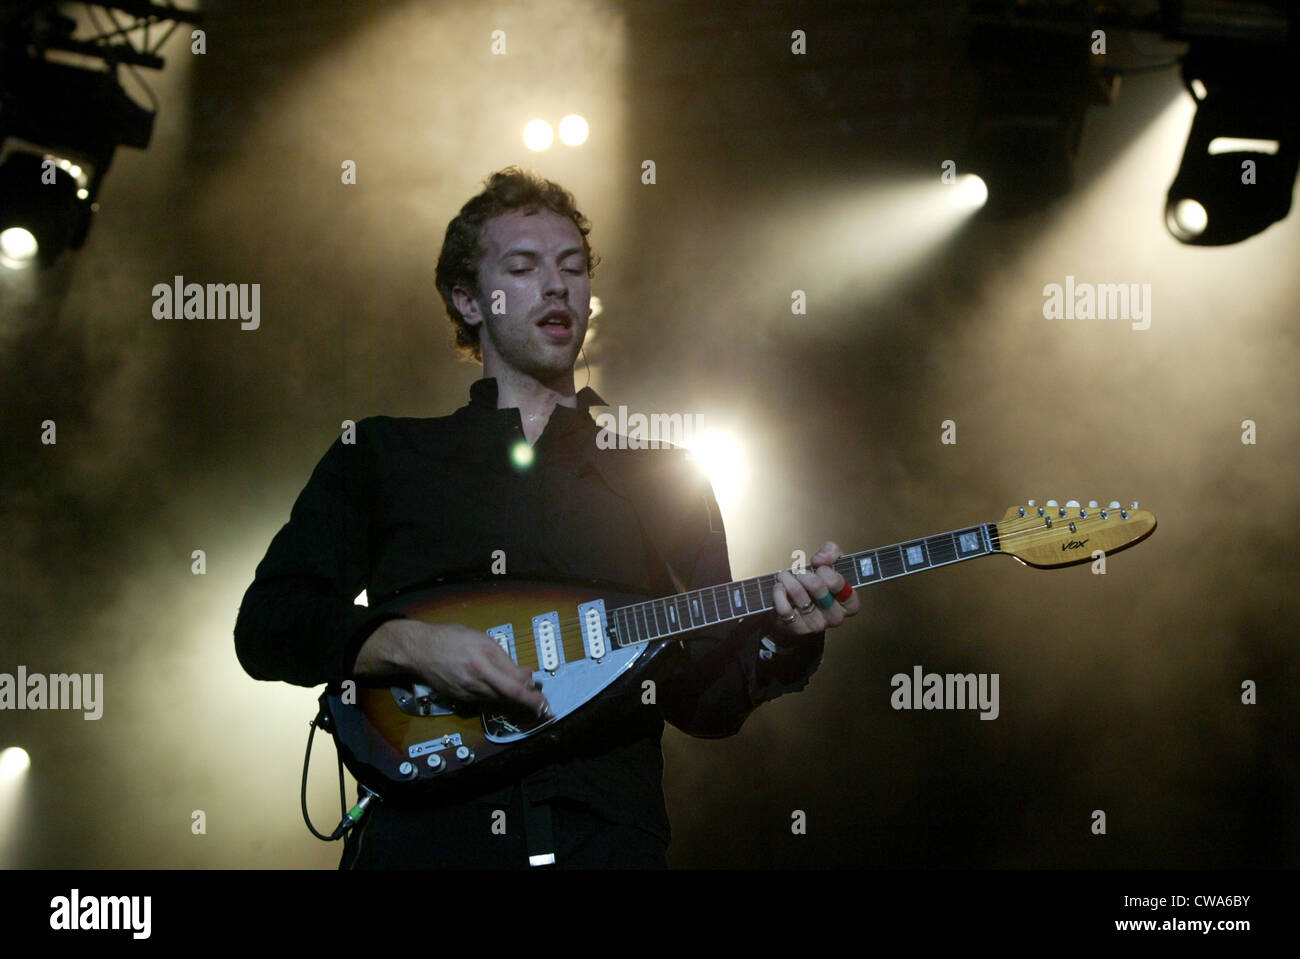 Coldplay Band High Resolution Stock Photography and Images - Alamy